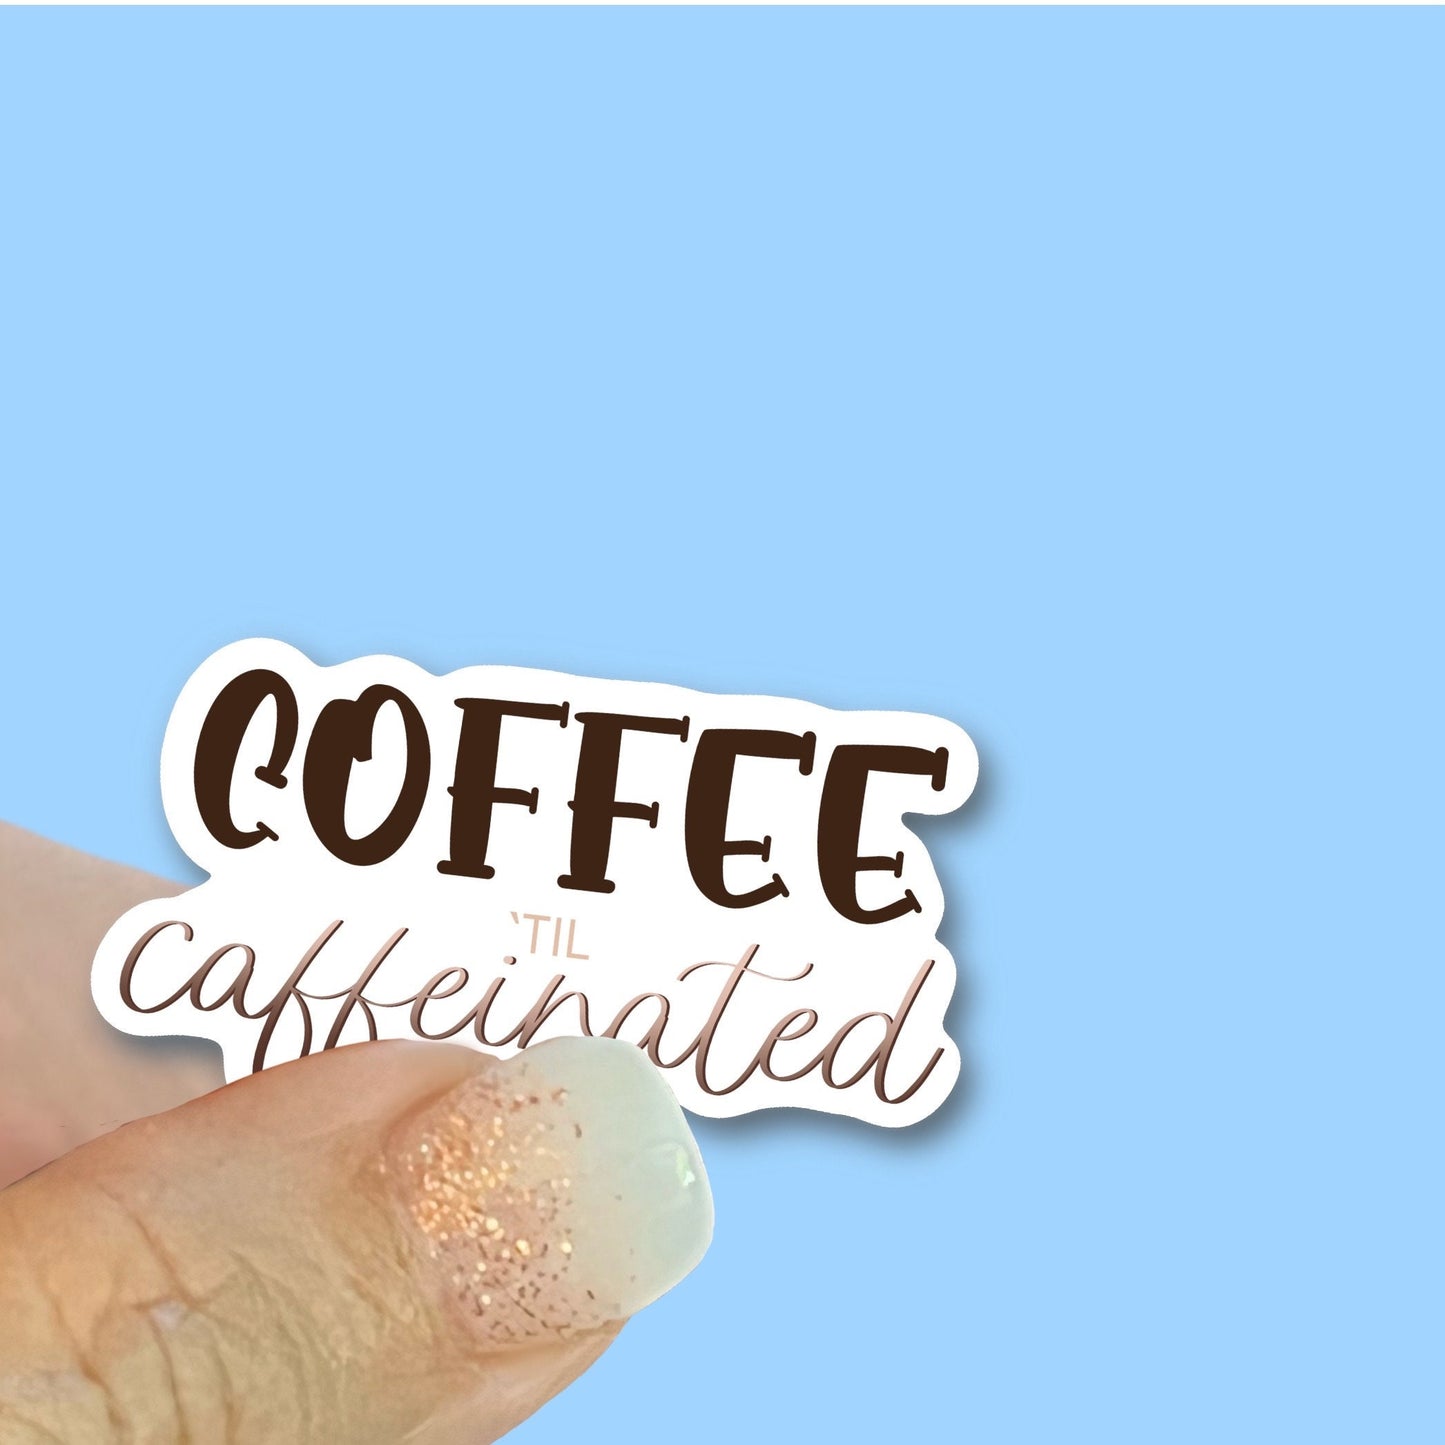 Coffee til Caffeinated- 2.5 inch Vinyl Waterproof, UV resistant Sticker, choice of size